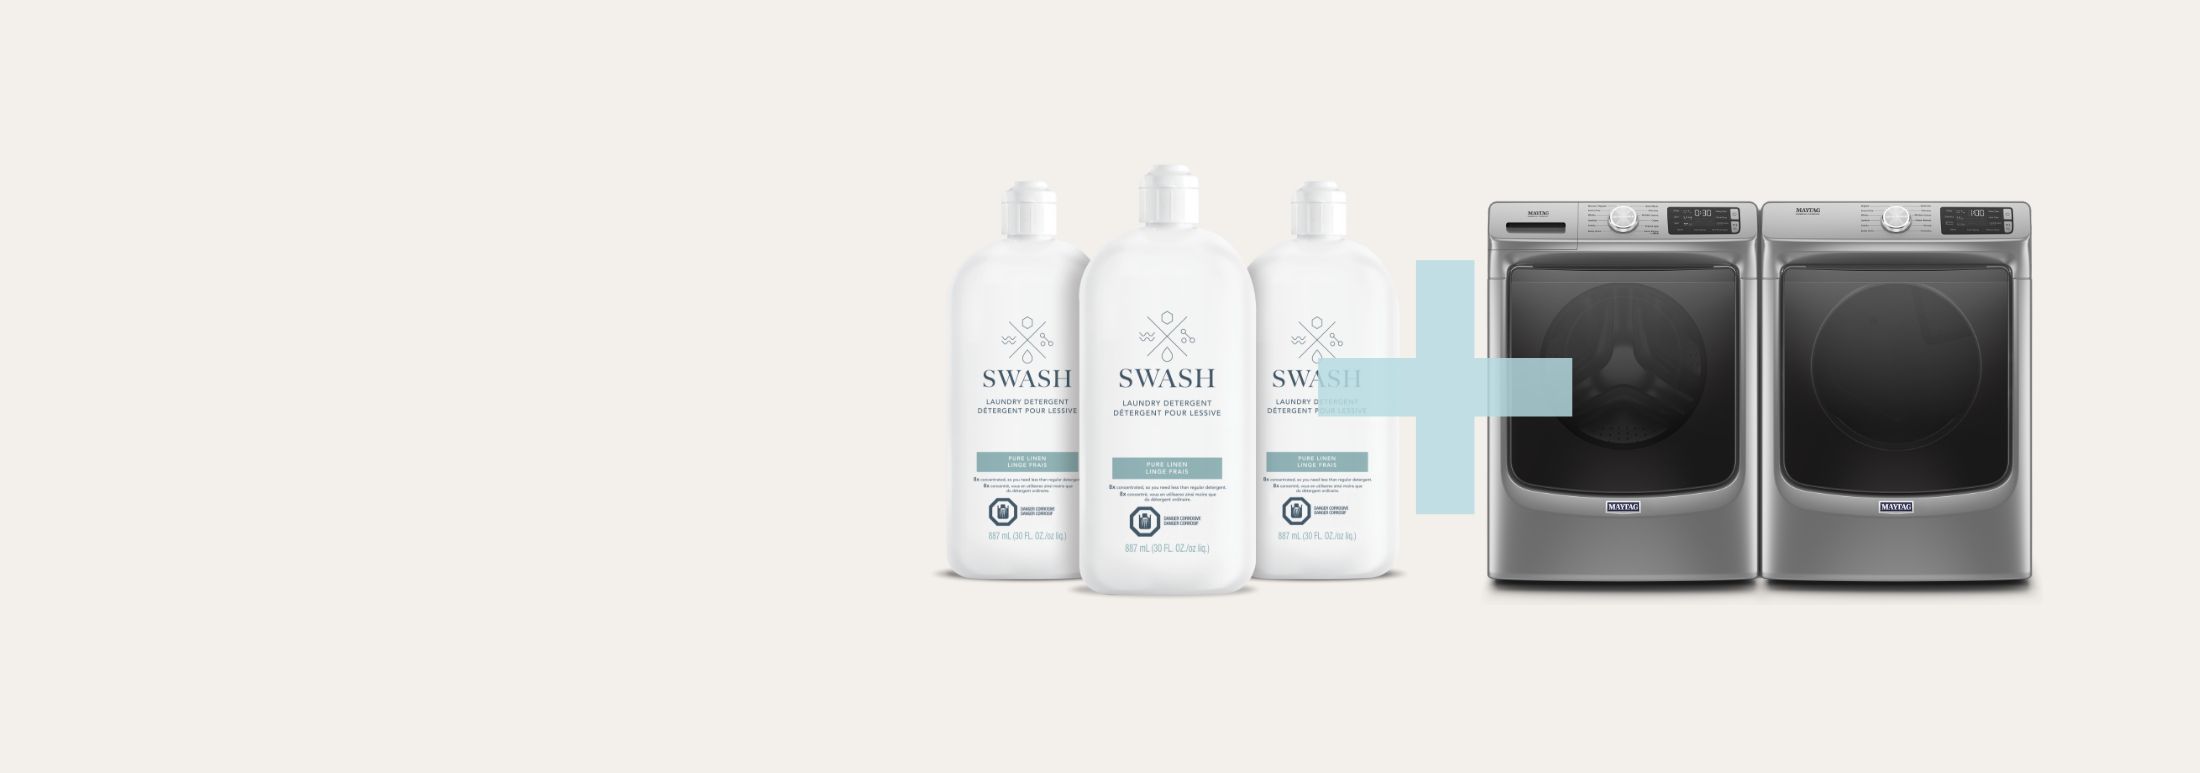 Swash Pure Linen Laundry Detergent laying flat amongst some fresh laundry